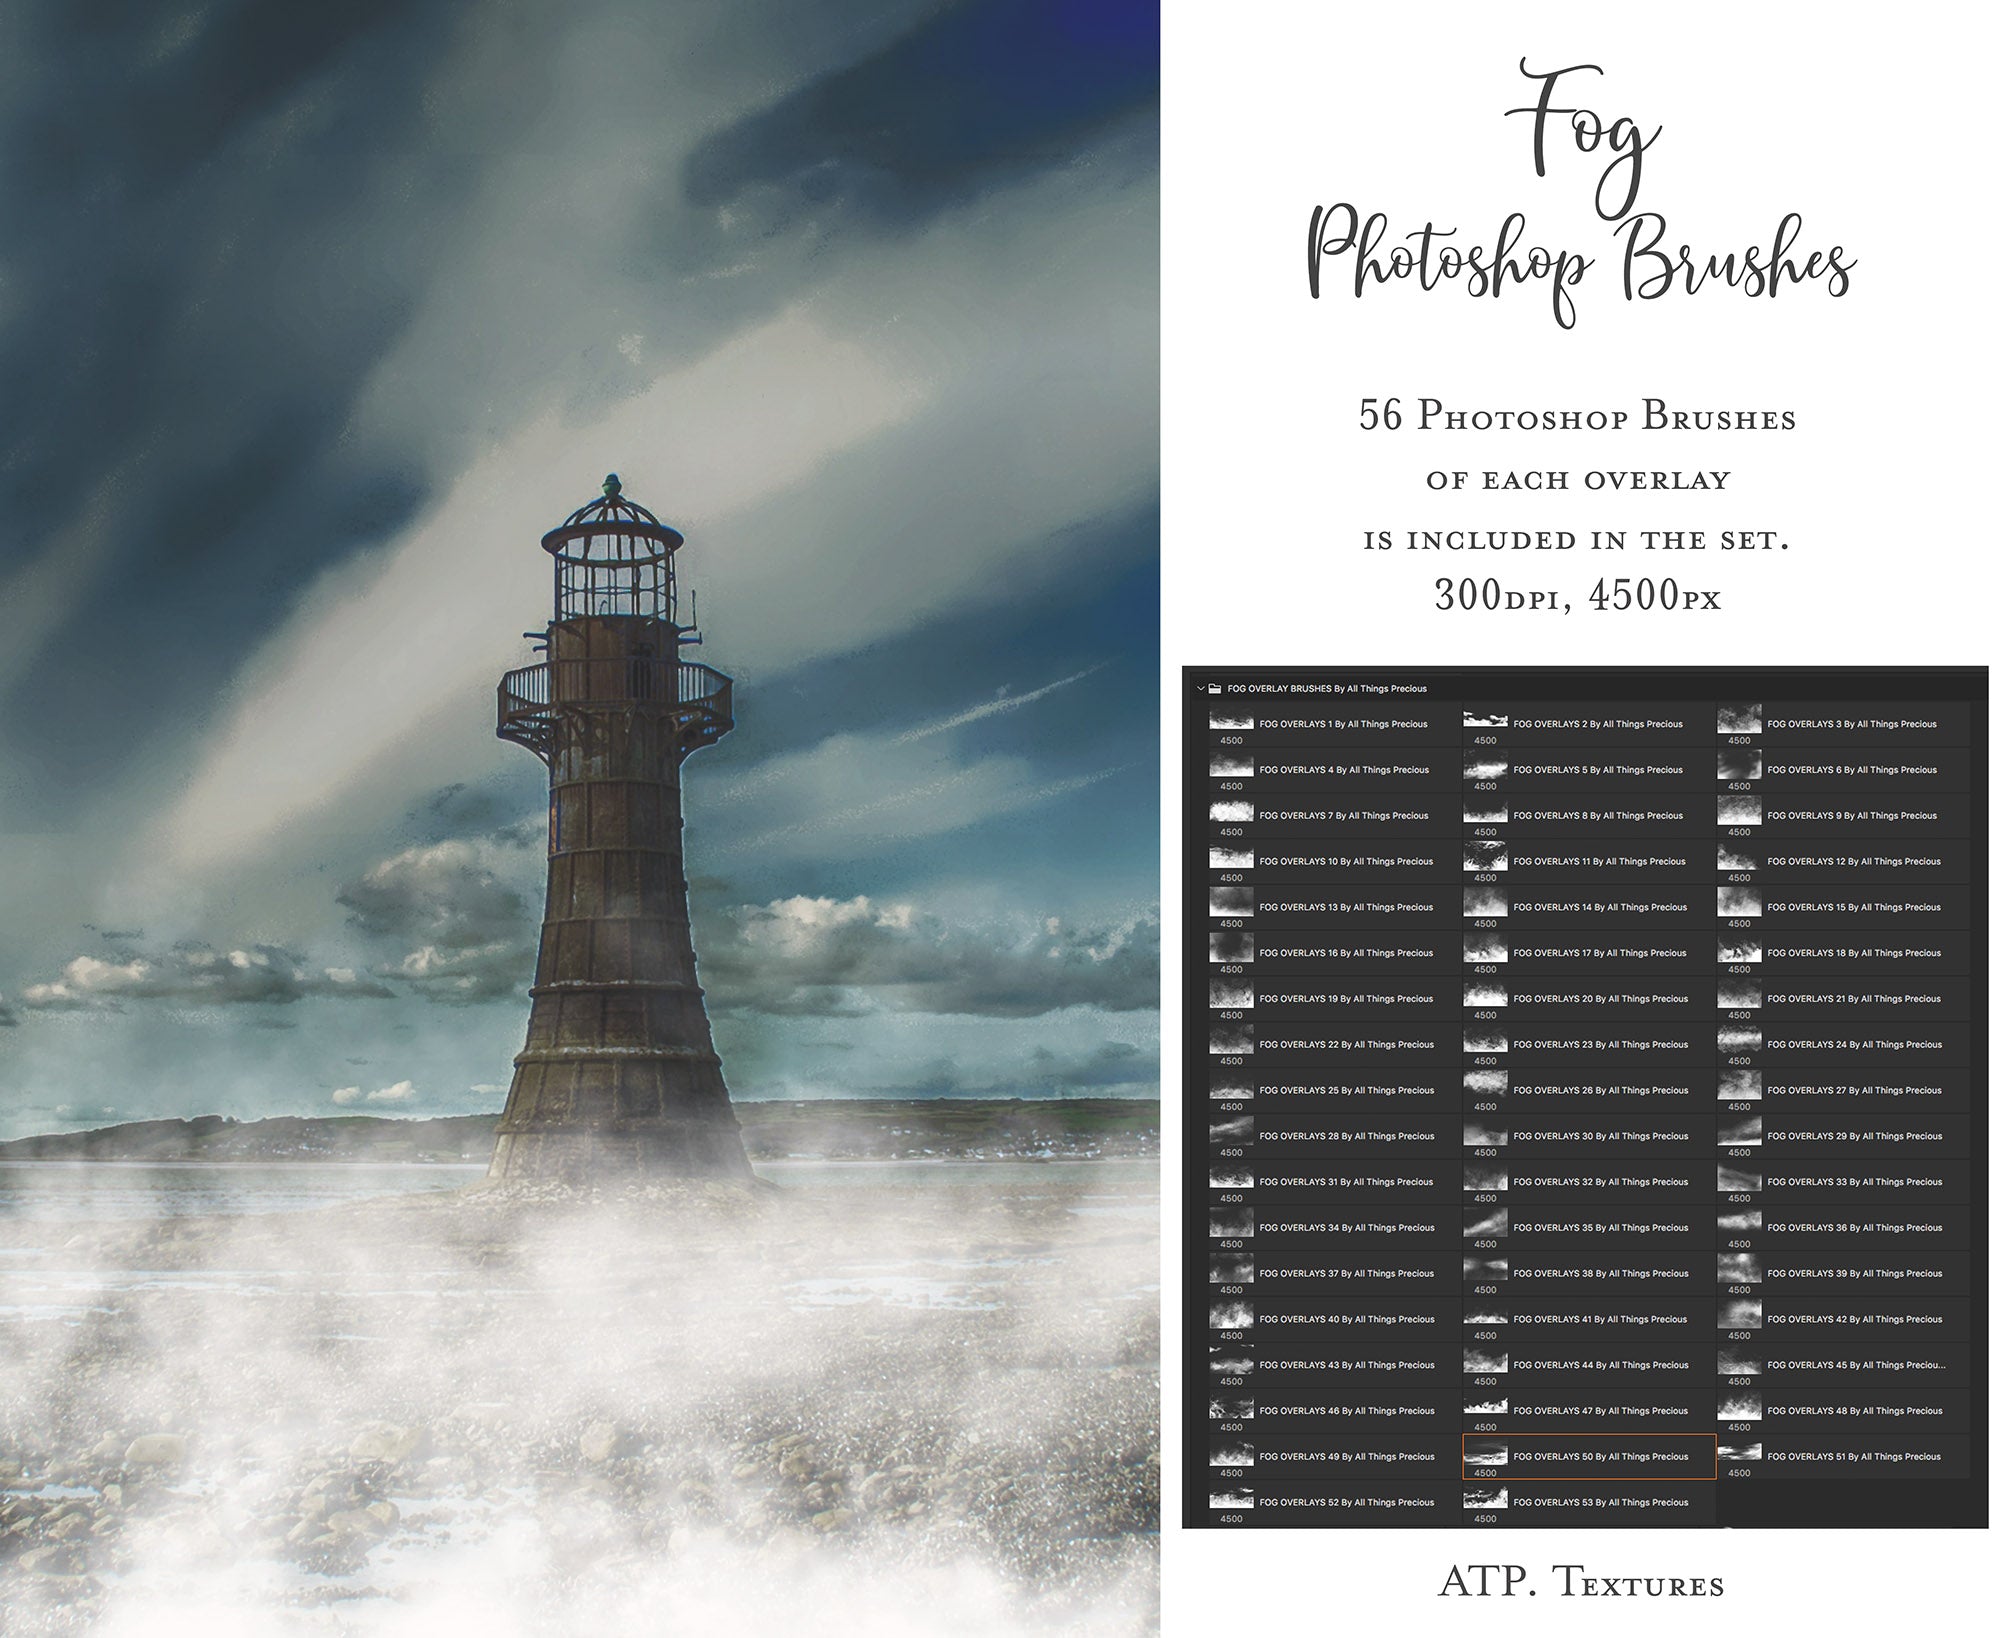 This set of Overlays & Photoshop Brushes includes 56 fog overlays all different and unique! Photoshop brushes with overlays for photography and digital design. Digital Stamps for scrapbooking, photography and graphic design. Realistic photography. Assets and Add ons. High resolution. ATP Textures